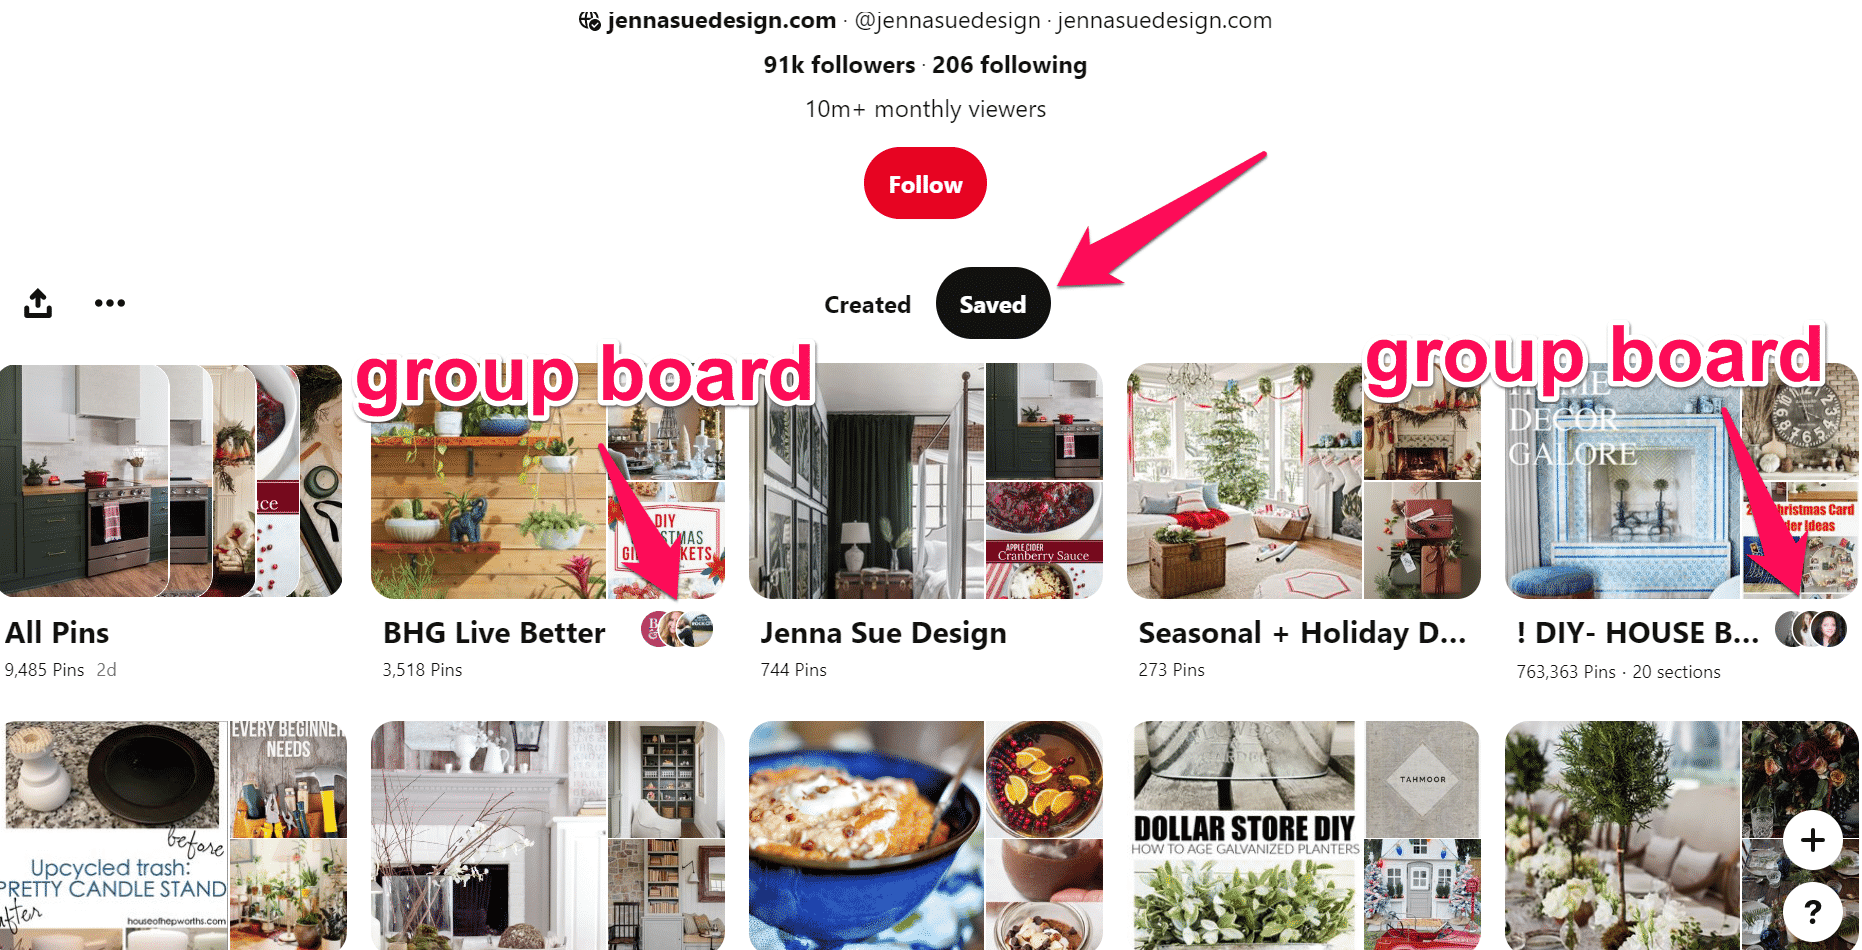 How To Find Group Boards On Pinterest 2022?